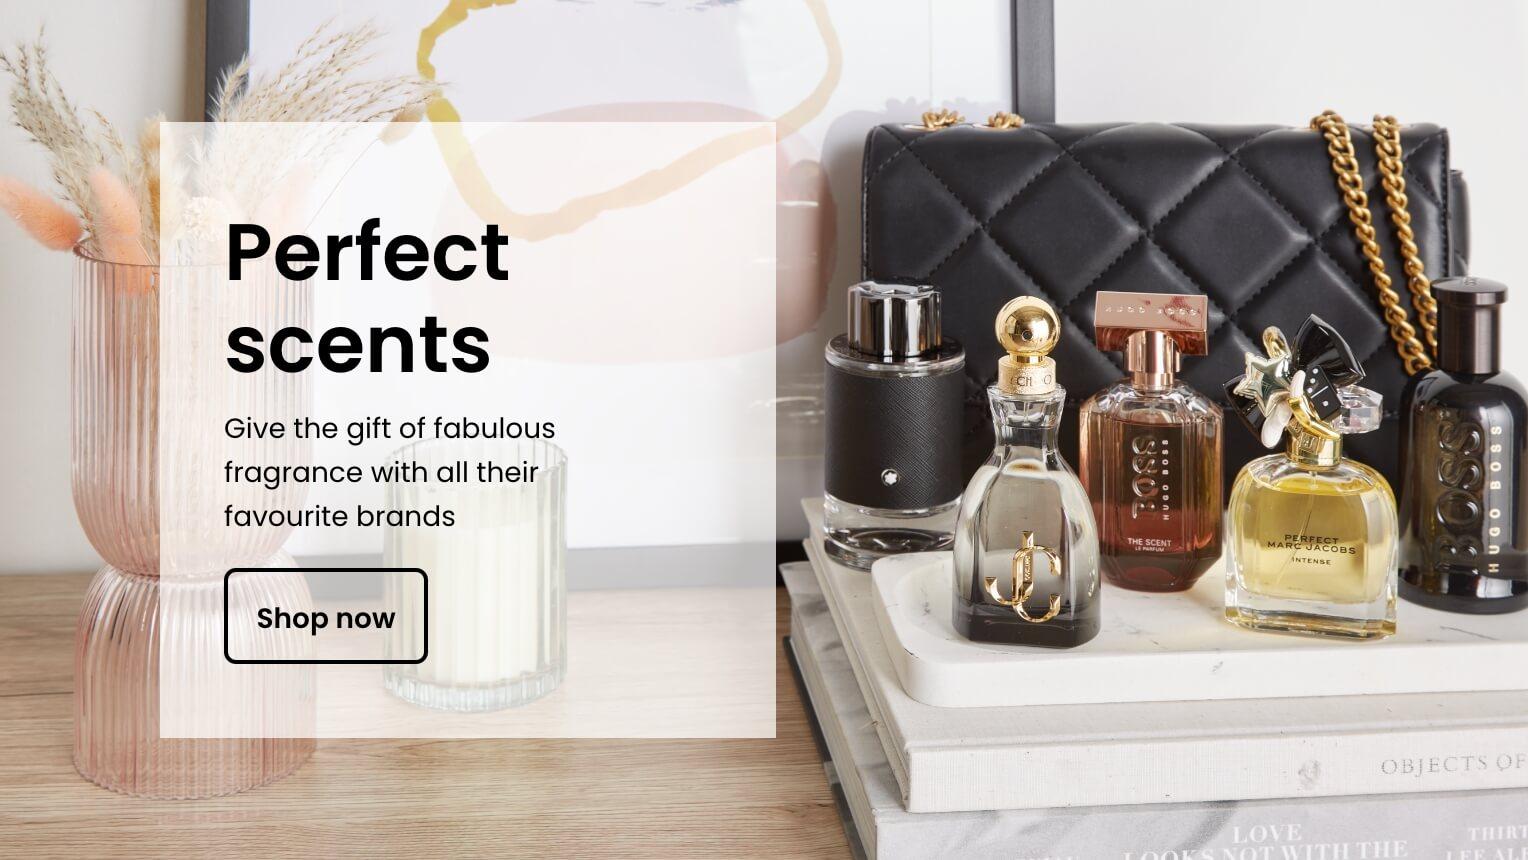 Perfect scents. Give the gift of fabulous fragrance with all their favourite brands. Shop now